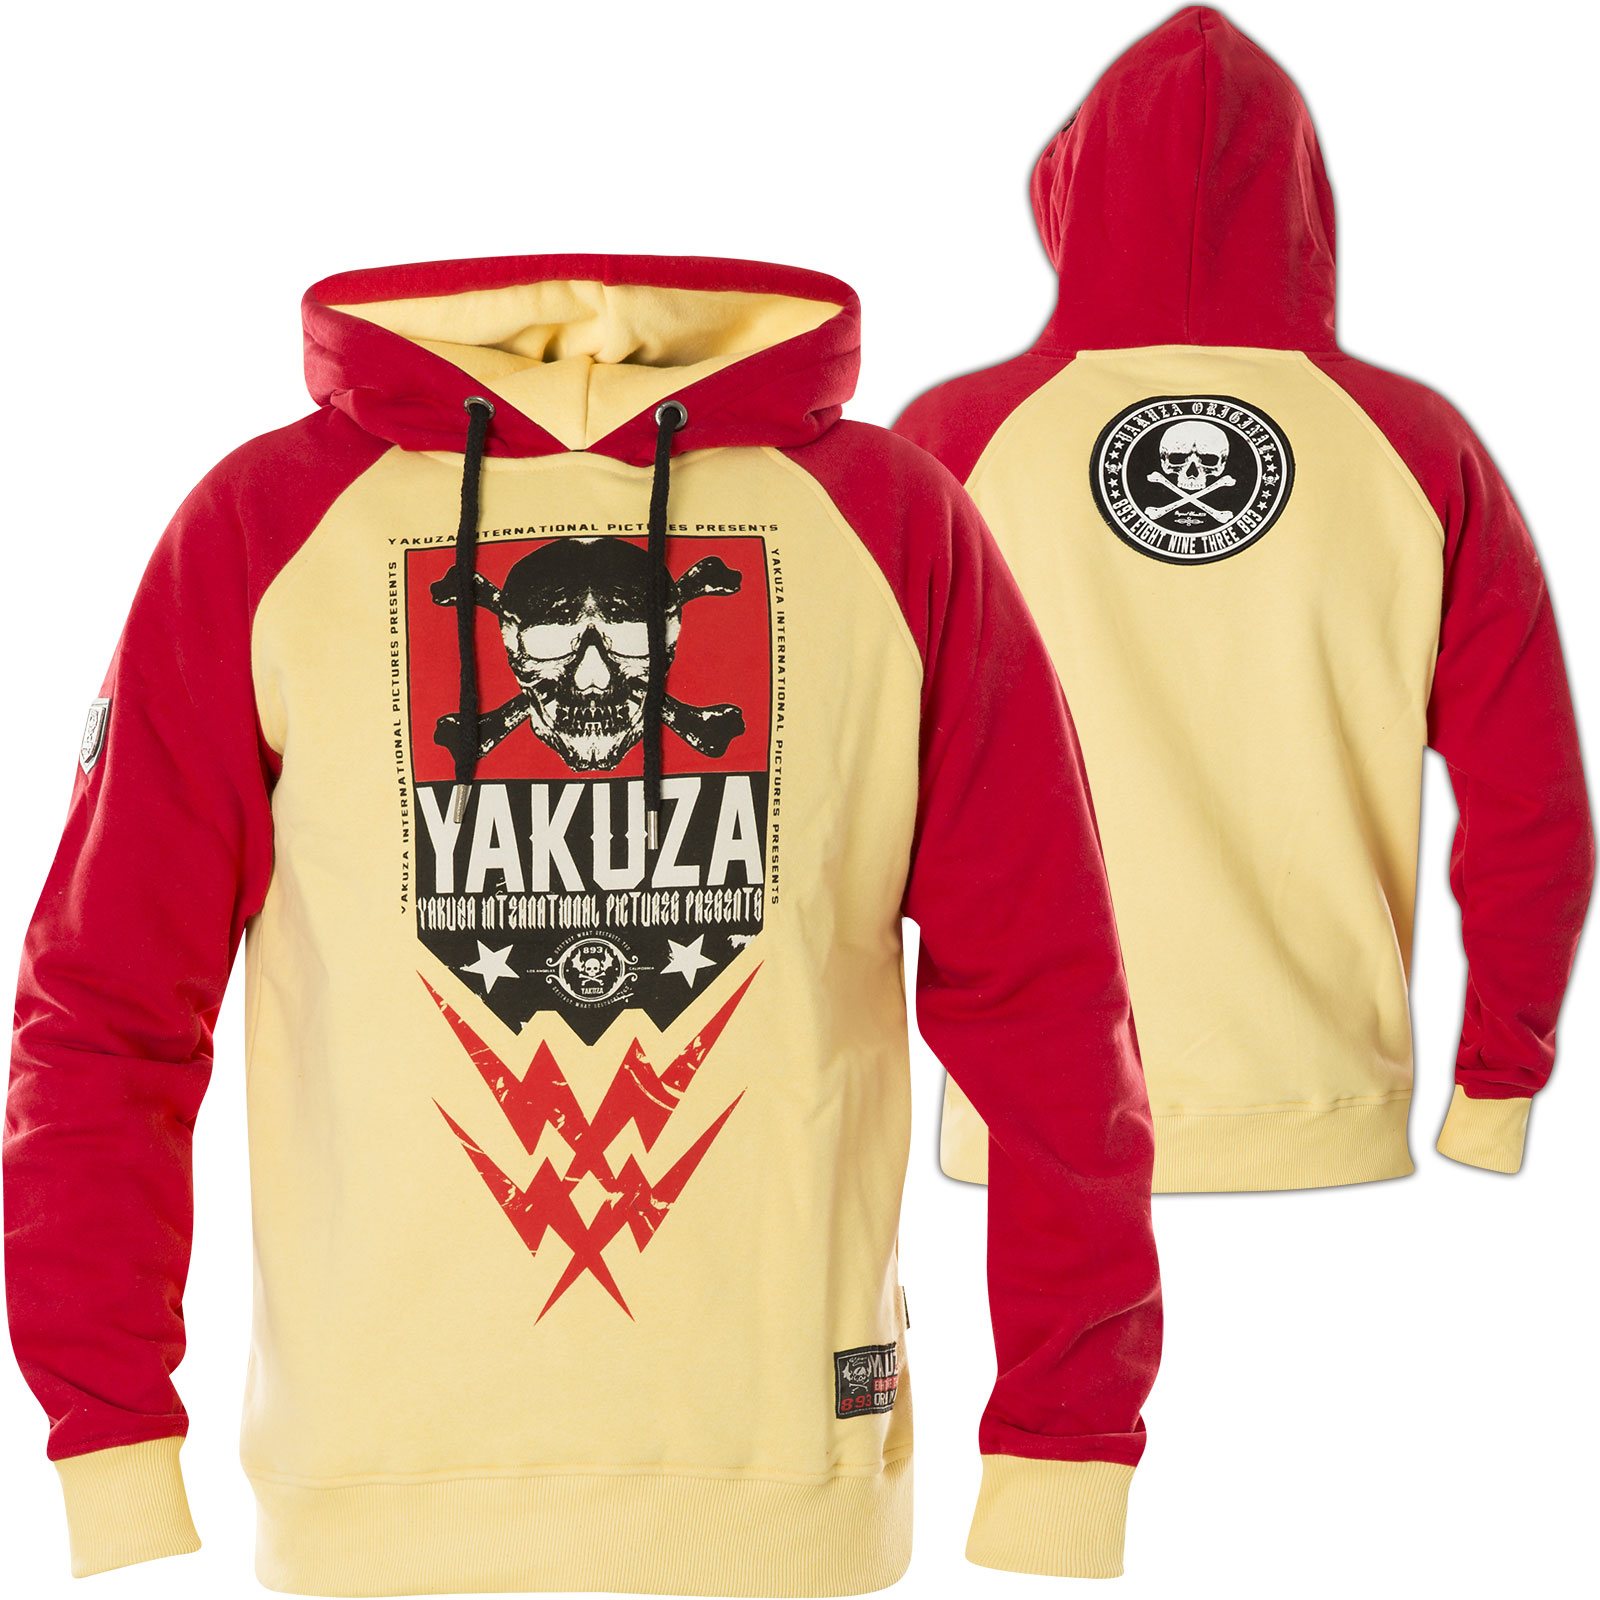 Yakusa-Messieurs Hoodie A levé 11002 "Skull Two Face" light grey chiné Gris 